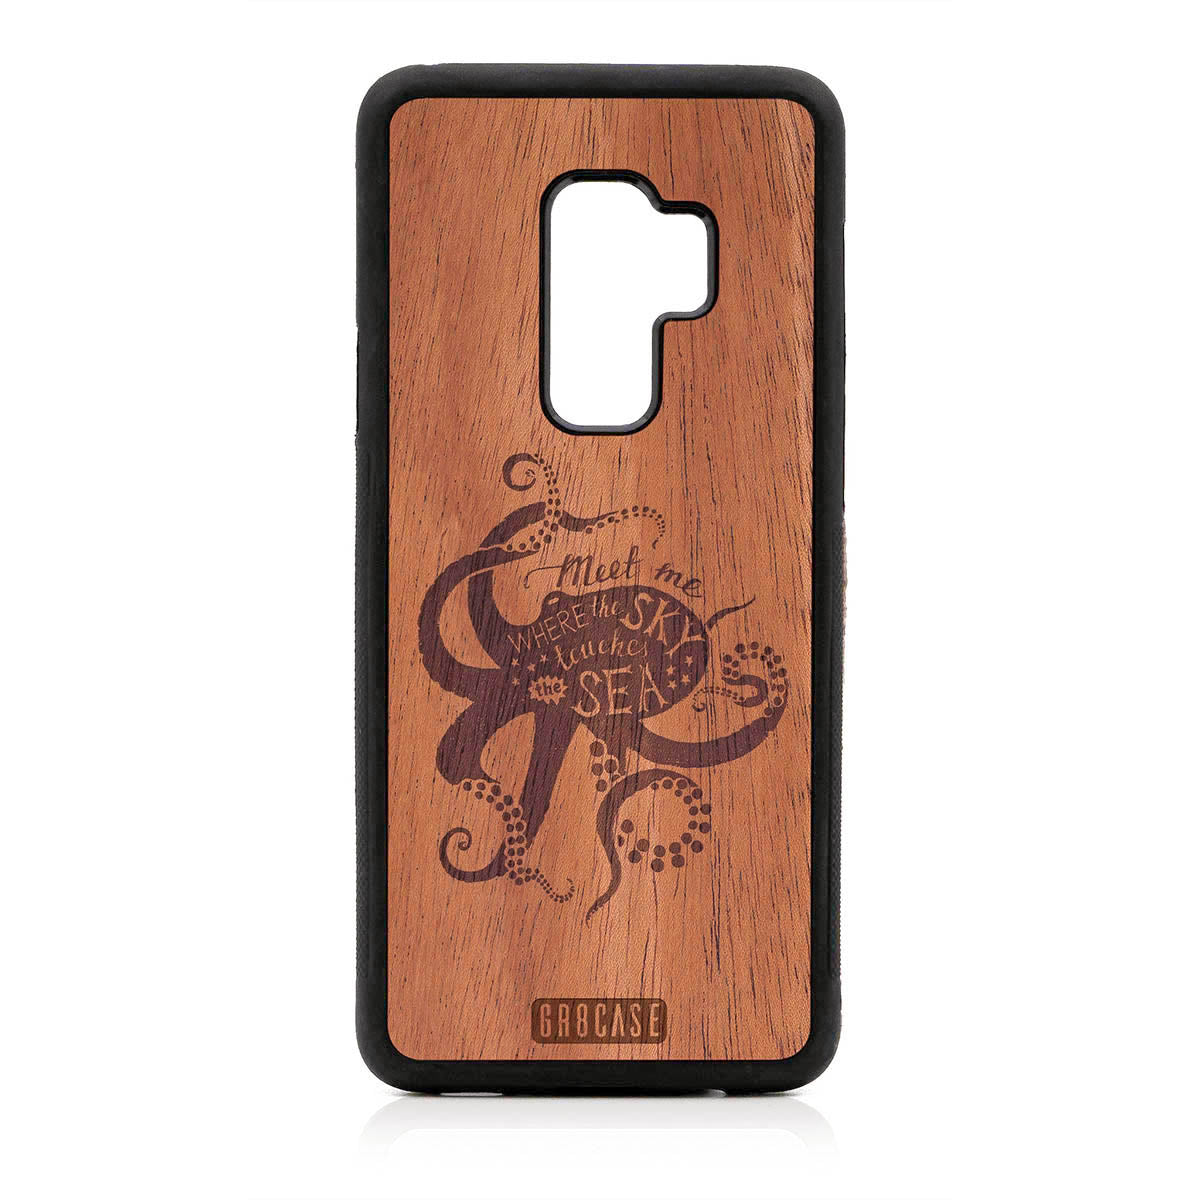 Meet Me Where The Sky Touches The Sea (Octopus) Design Wood Case For Samsung Galaxy S9 Plus